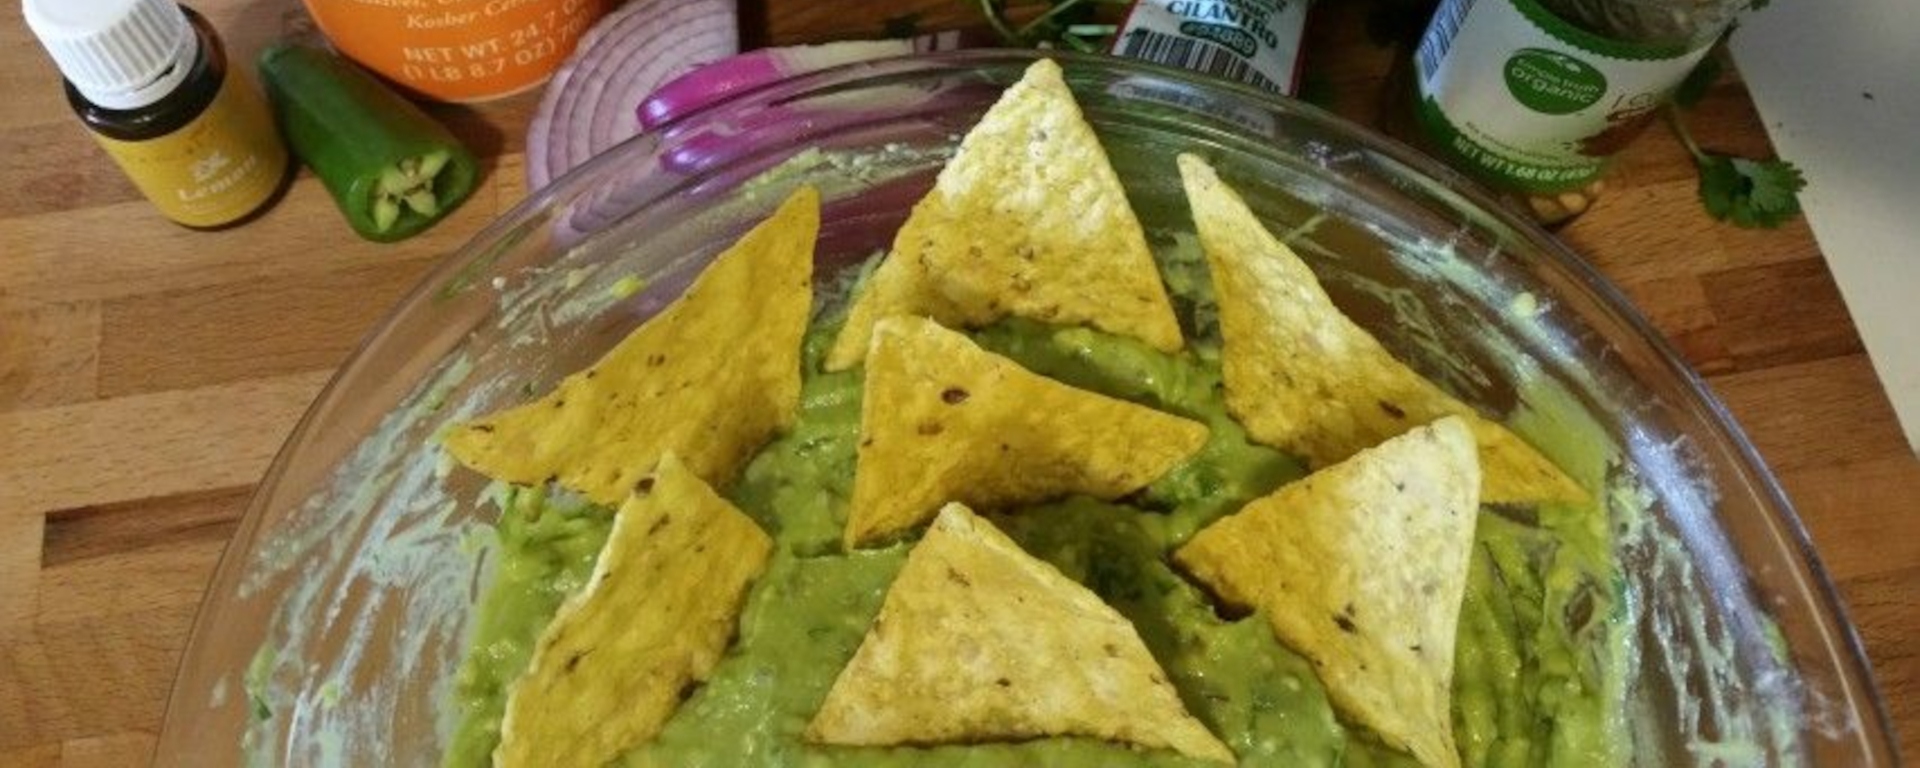 Organic Guacamole with Essential Oils